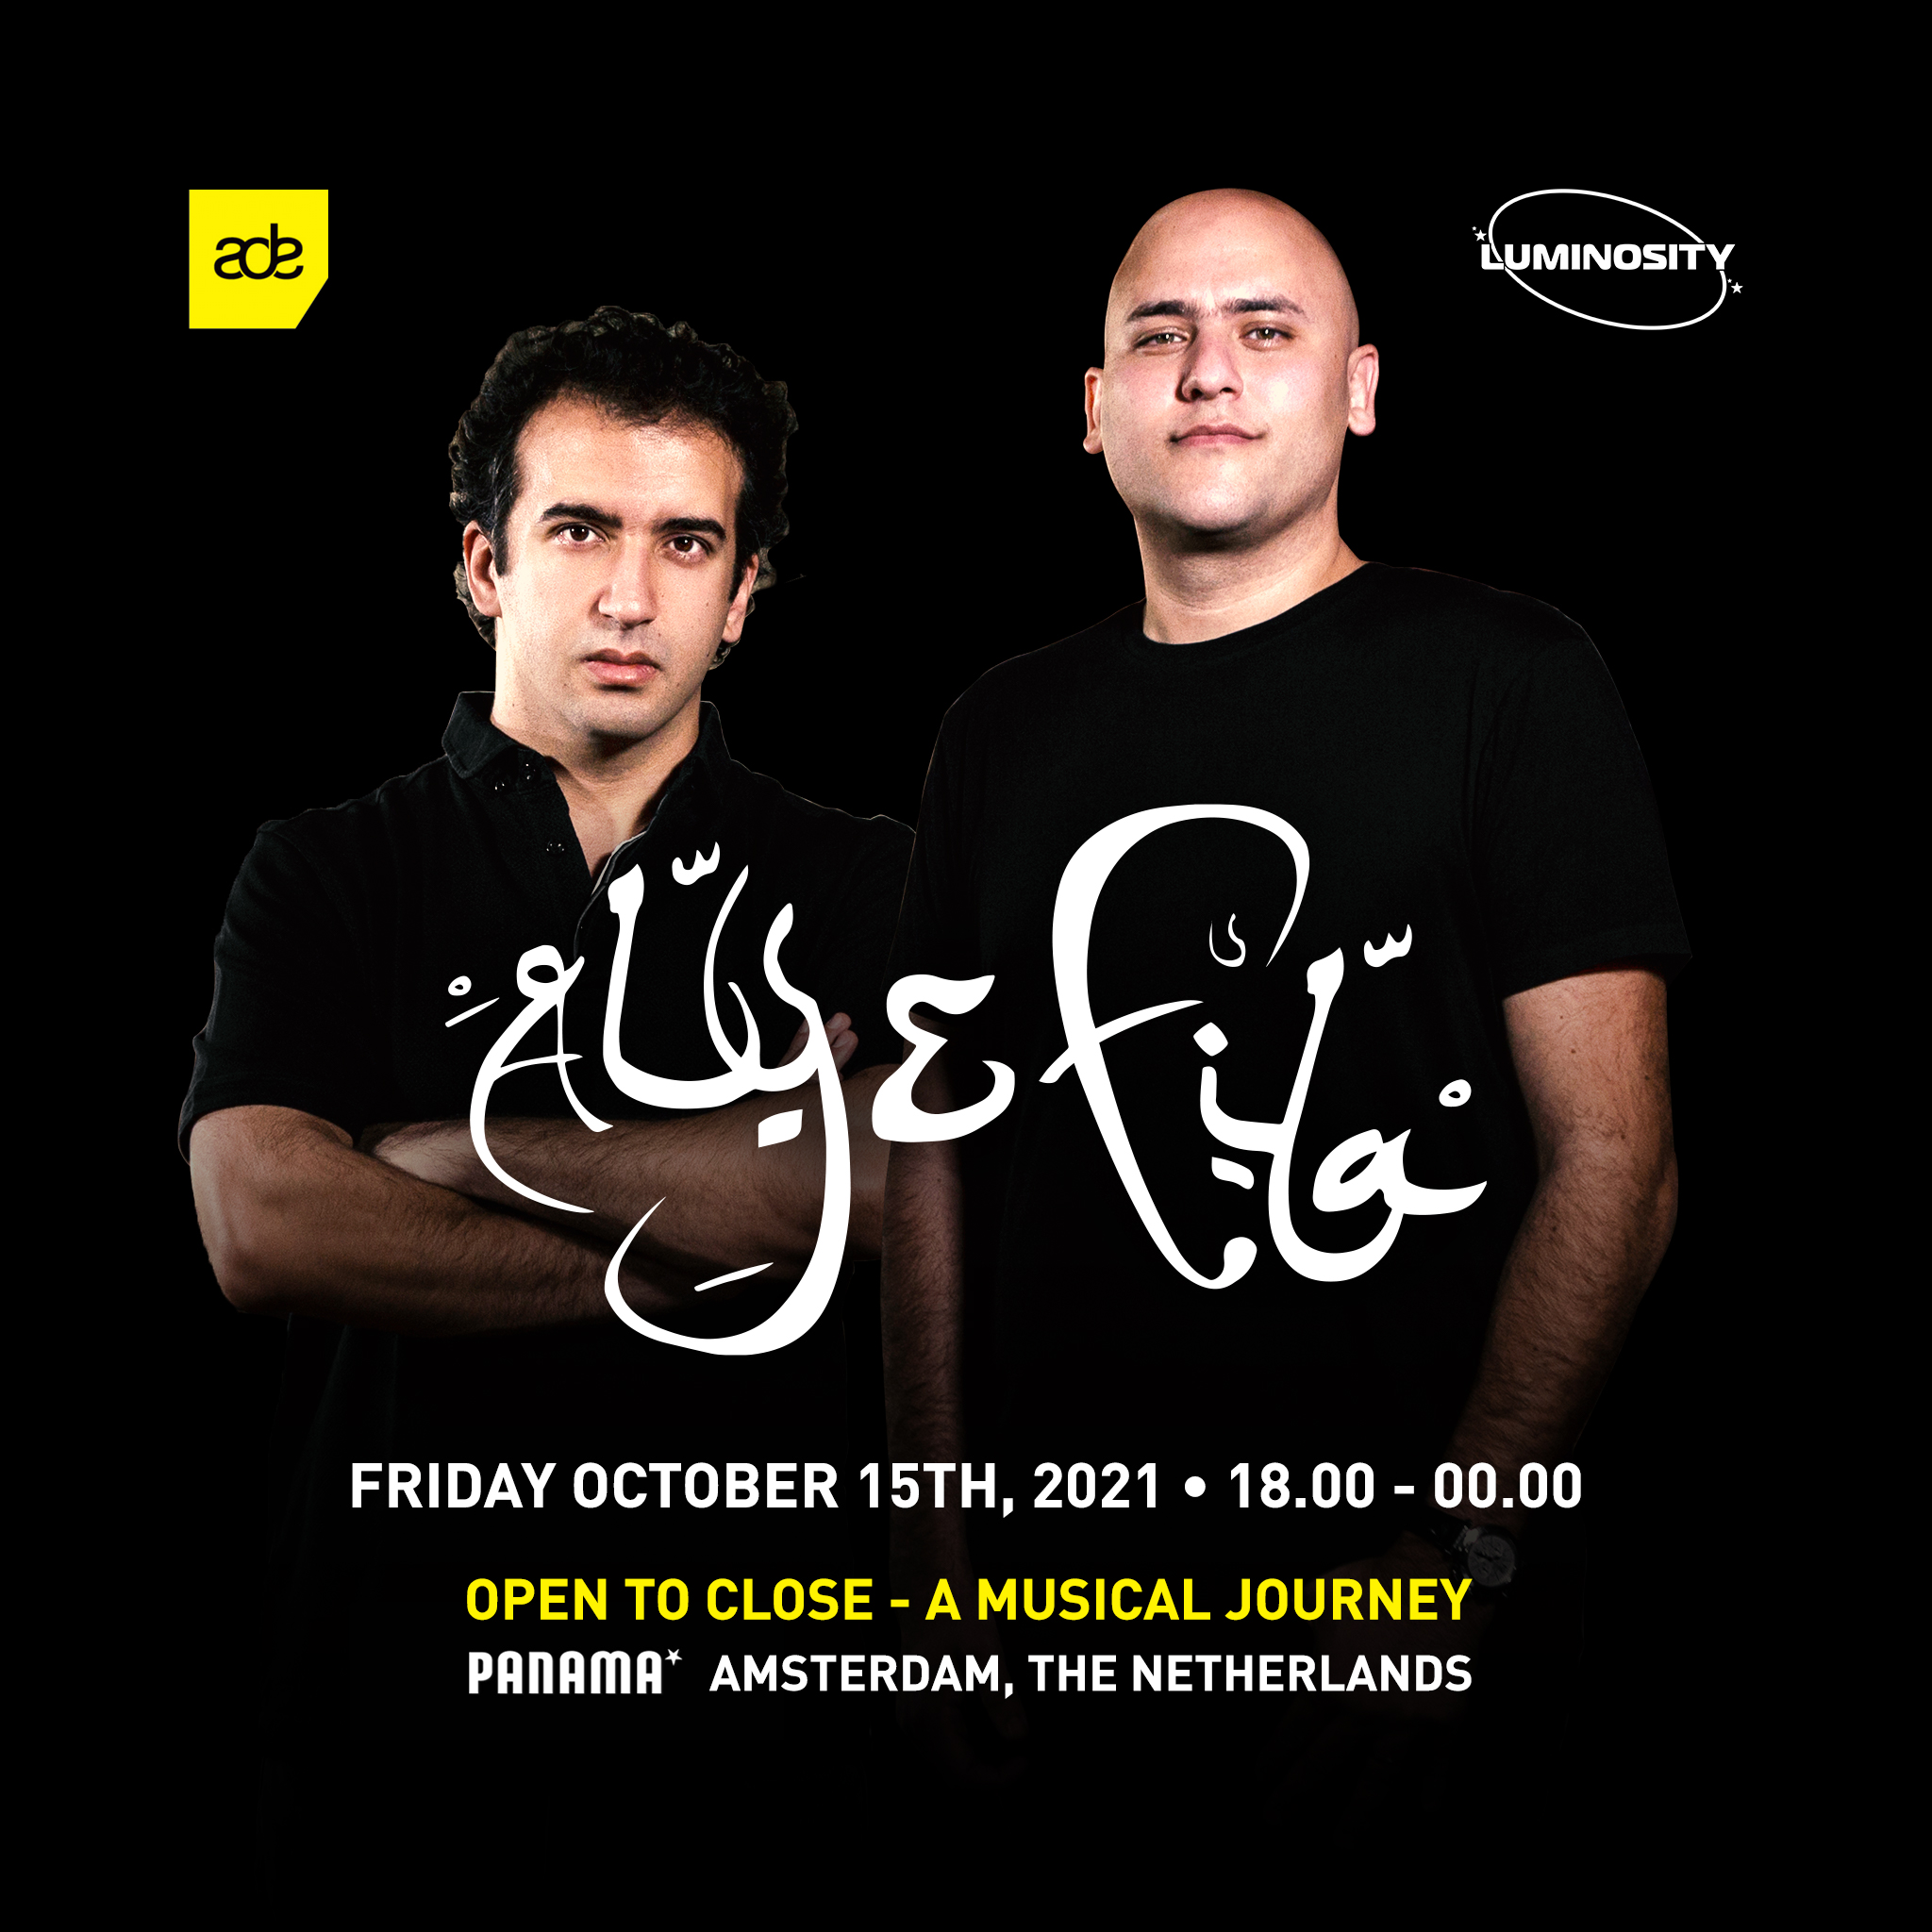 Aly & Fila on Twitter: "Amsterdam, it's been way too long! We'll be taking a journey this October with a very special Open To Close set at @panamaamsterdam! Who